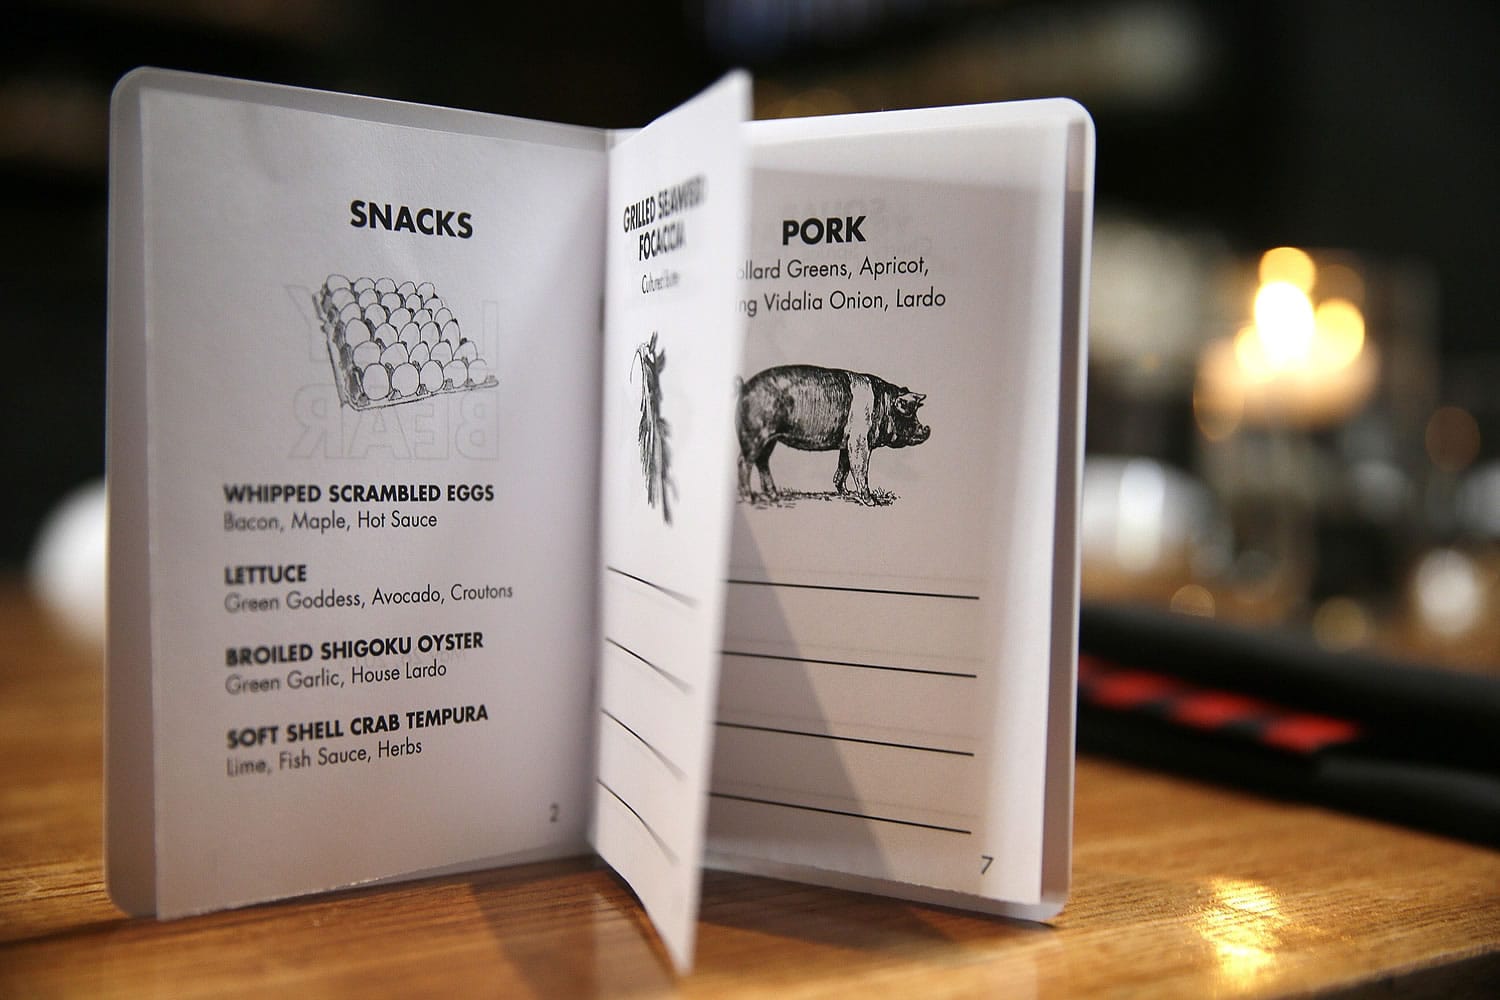 The evening's menu is displayed in a field guide with room for tasting notes at the Lazy Bear restaurant in San Francisco.